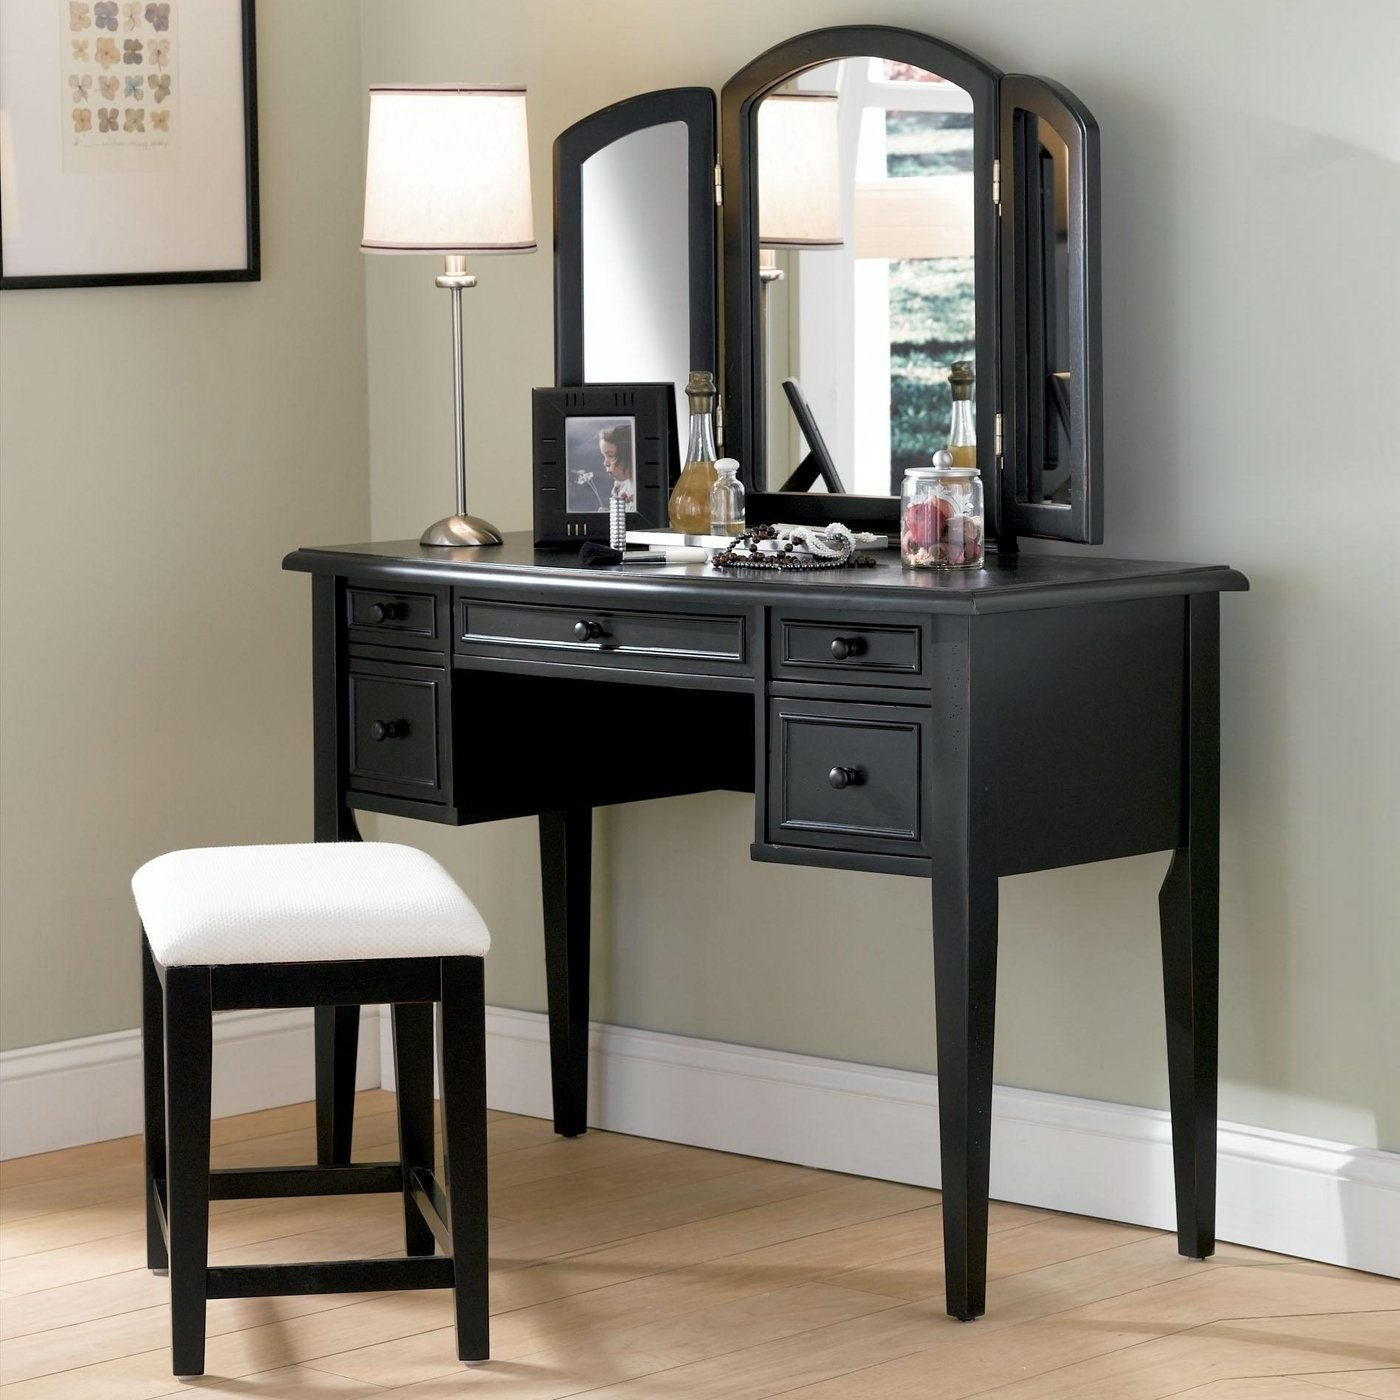 35 Most First Rate Makeup Vanity Mirror Bedroom With Lights White intended for proportions 1400 X 1400